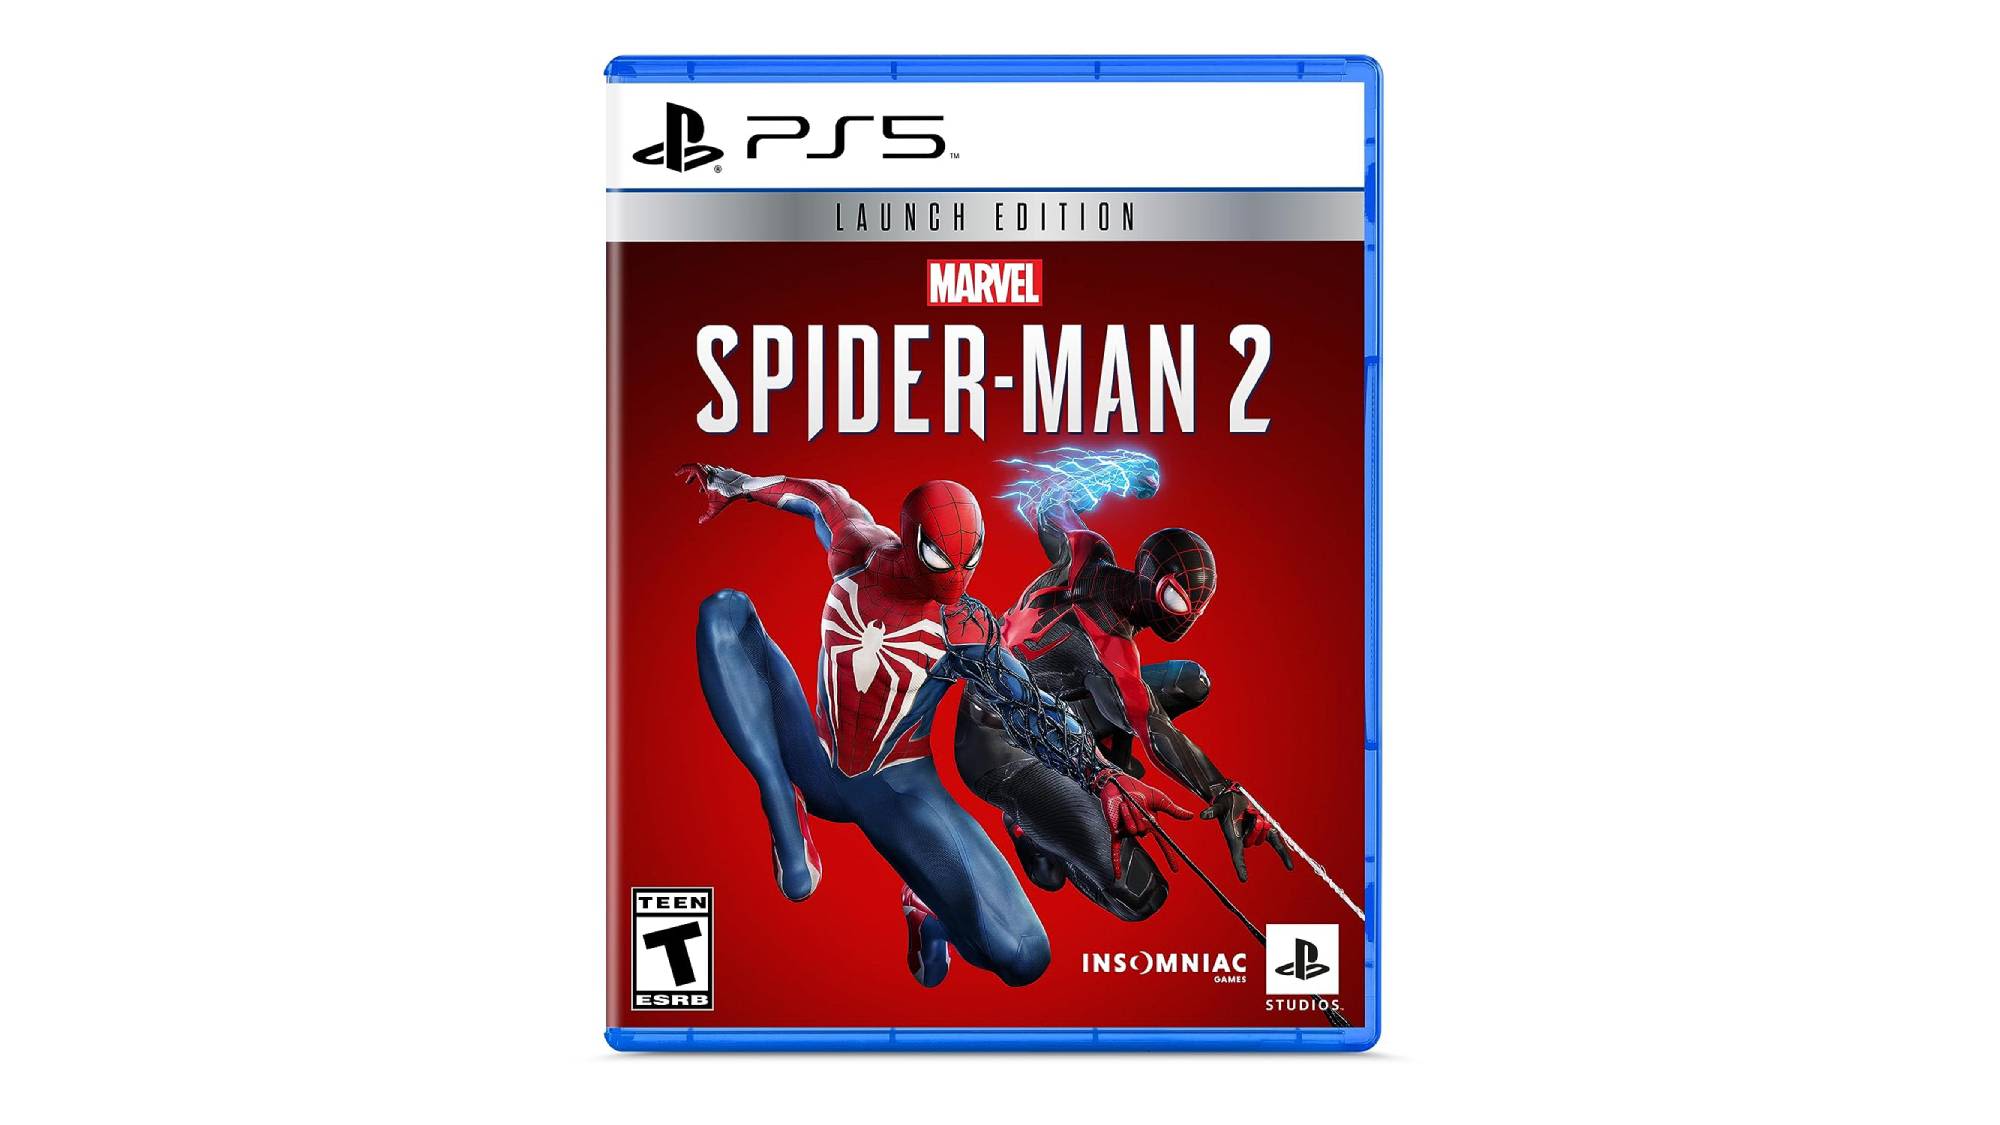 Marvel's Spider-Man 2 launches exclusively on PS5 this fall